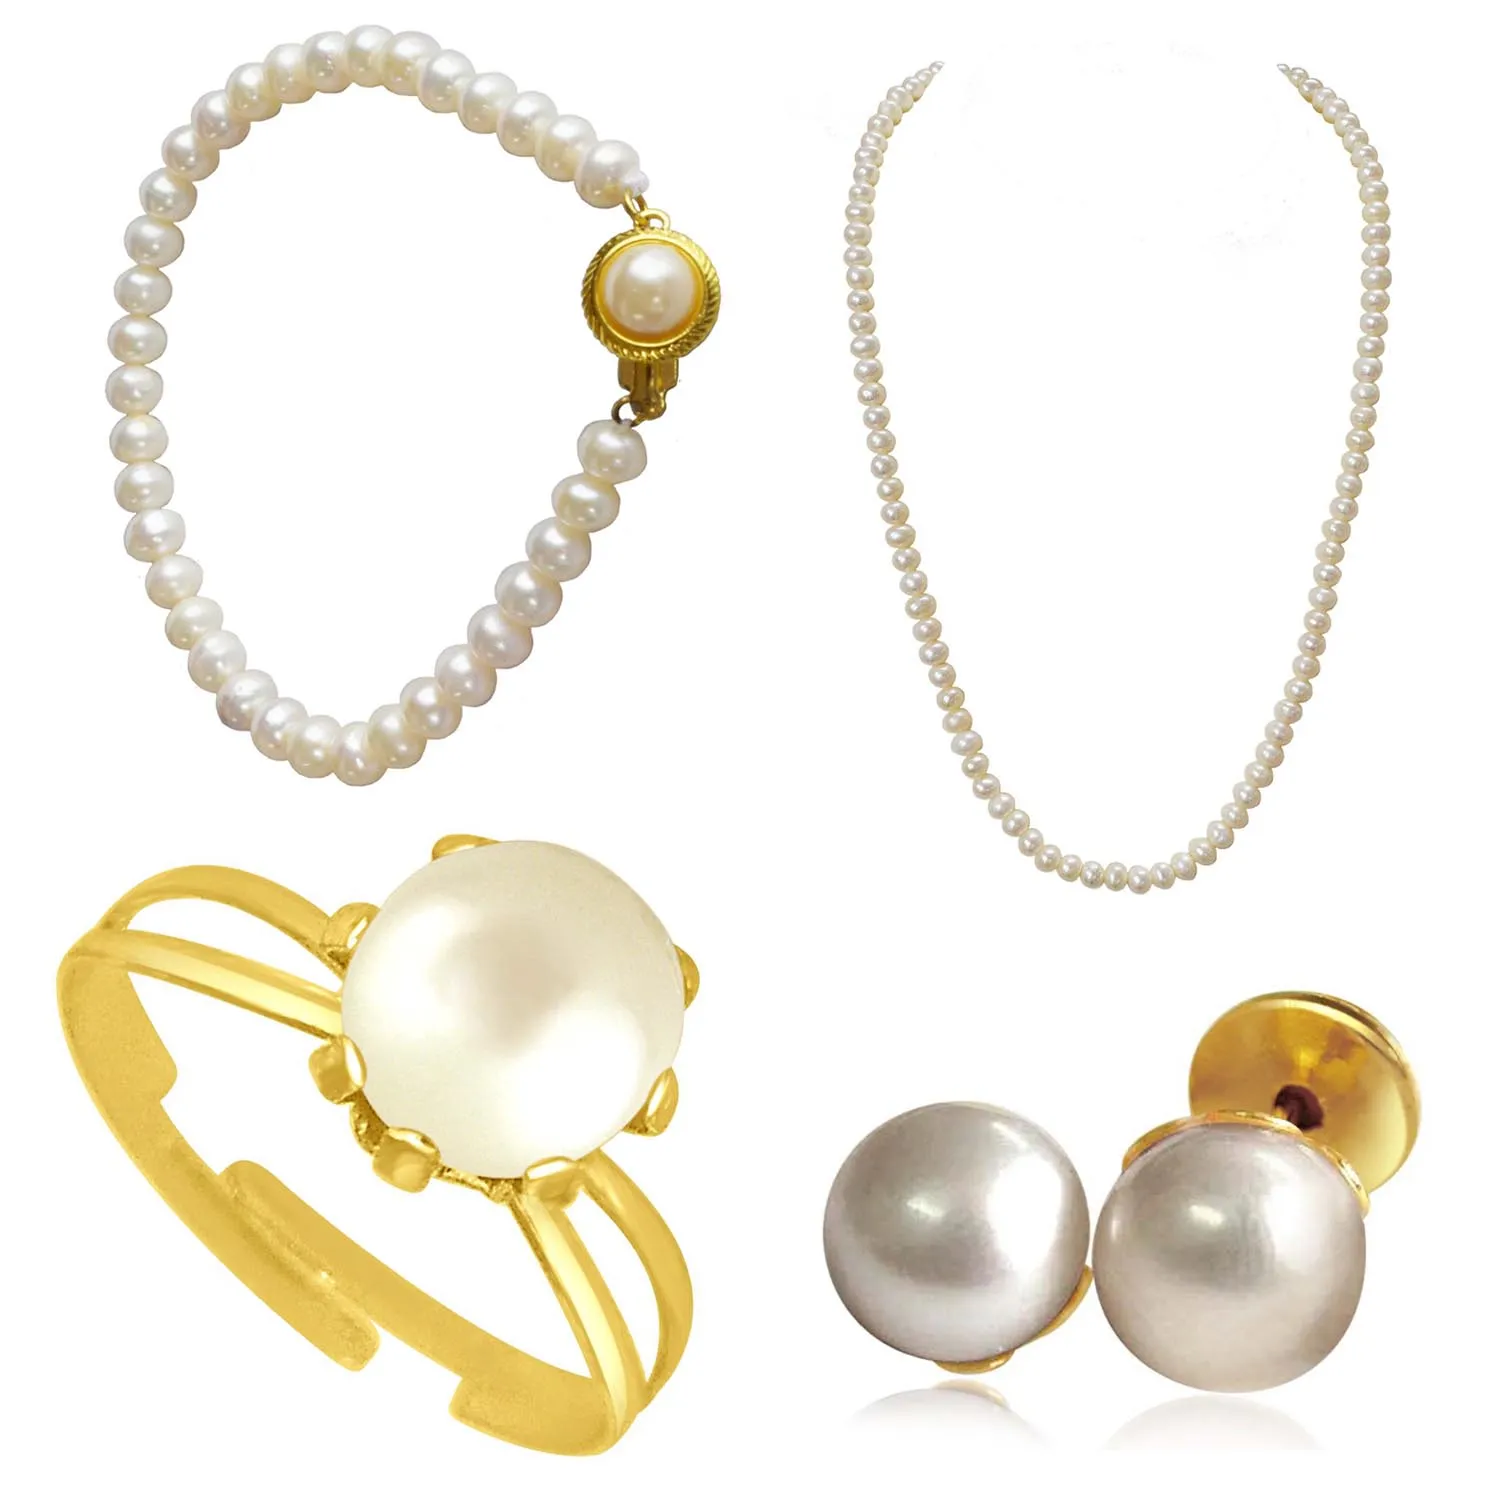 Single Line Real Natural Freshwater Pearl Necklace, Earrings, Ring, Bracelet Set (H1954)